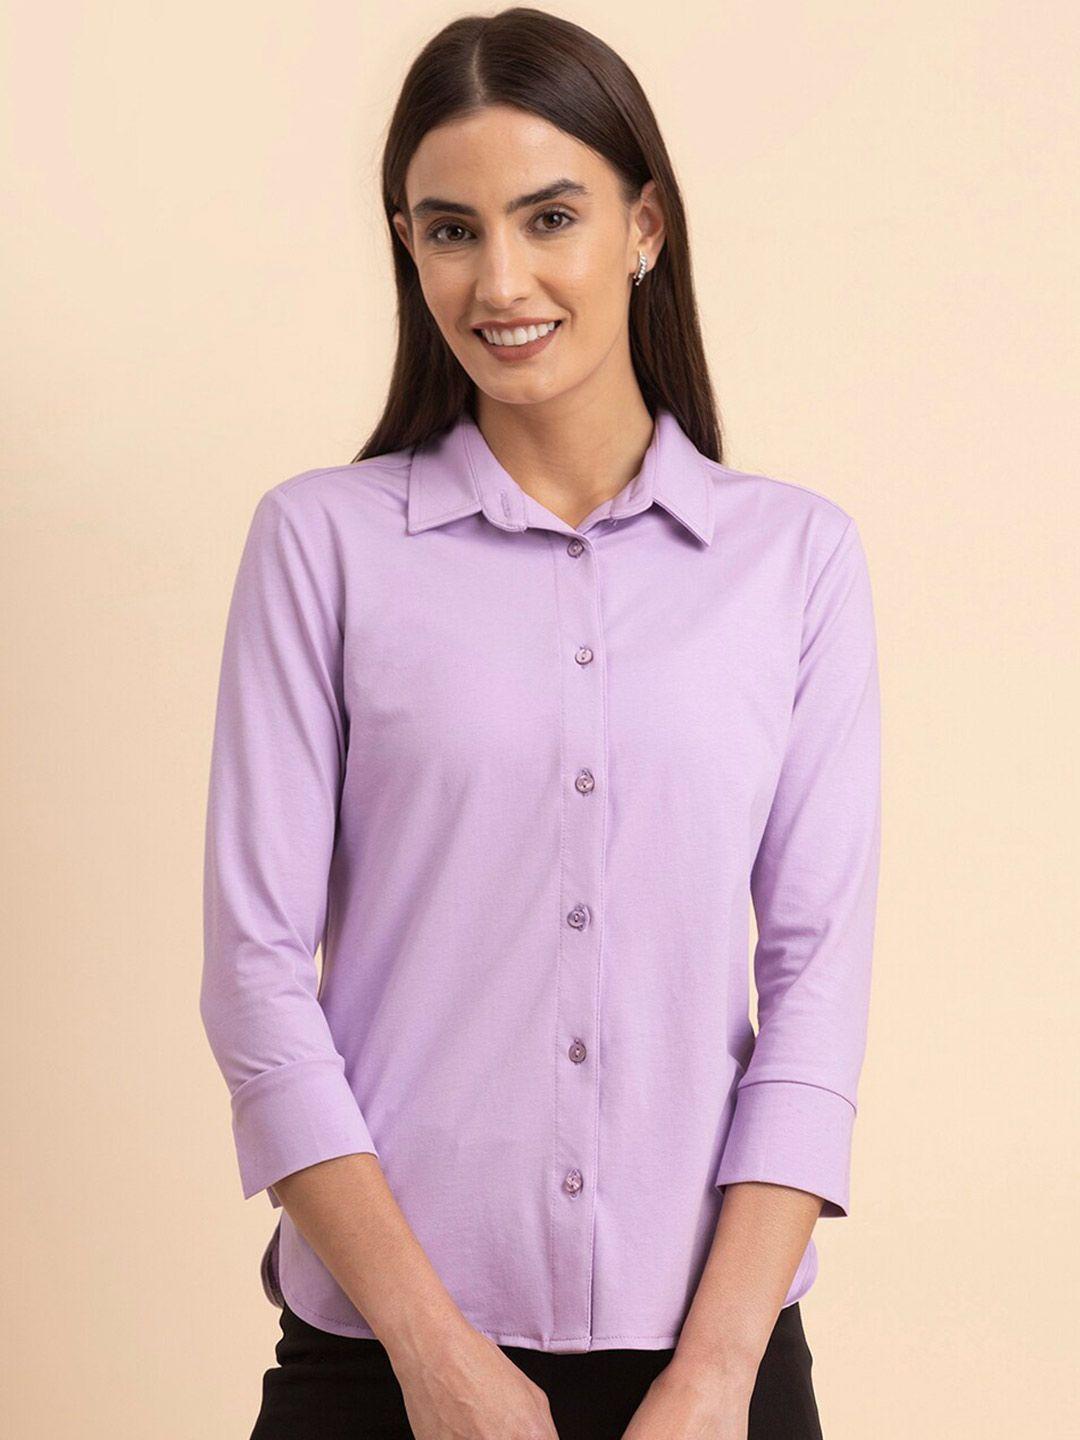 fablestreet classic casual shirt